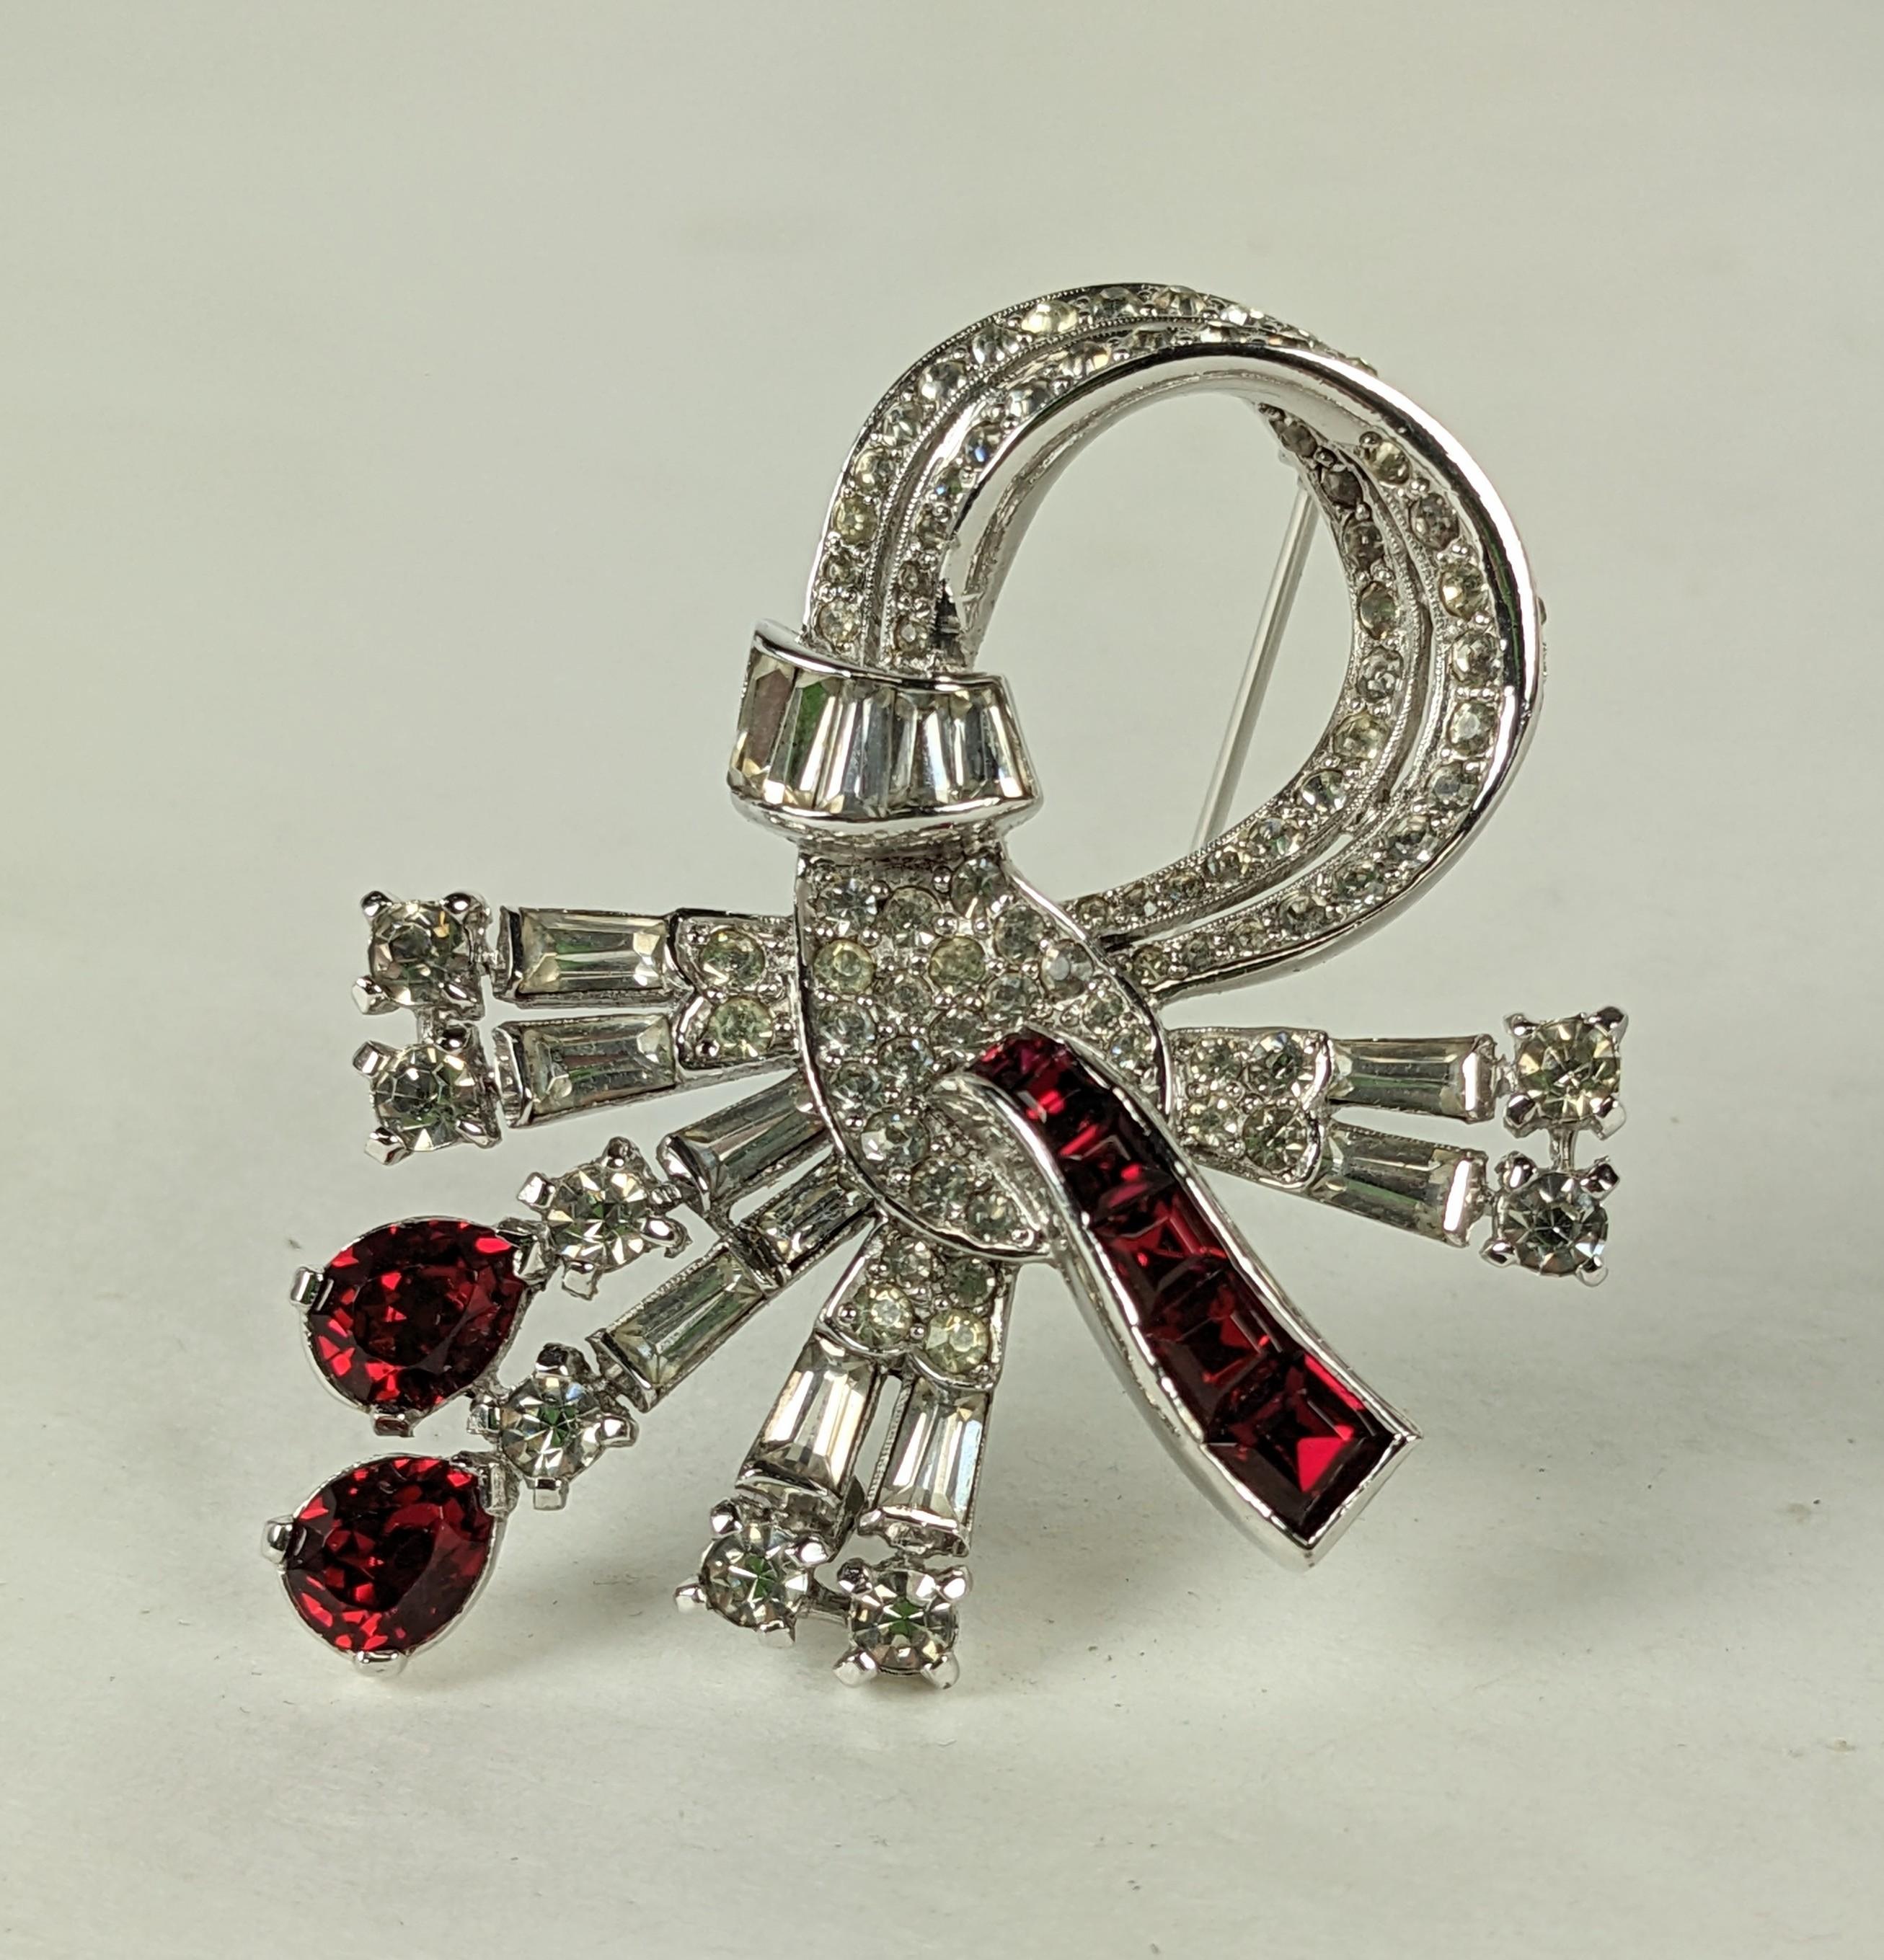 Elegant Mazer Ruby and Pave Spray from the 1950's. Swirl with pave and graduated baguette work in crystal and ruby. 2.25